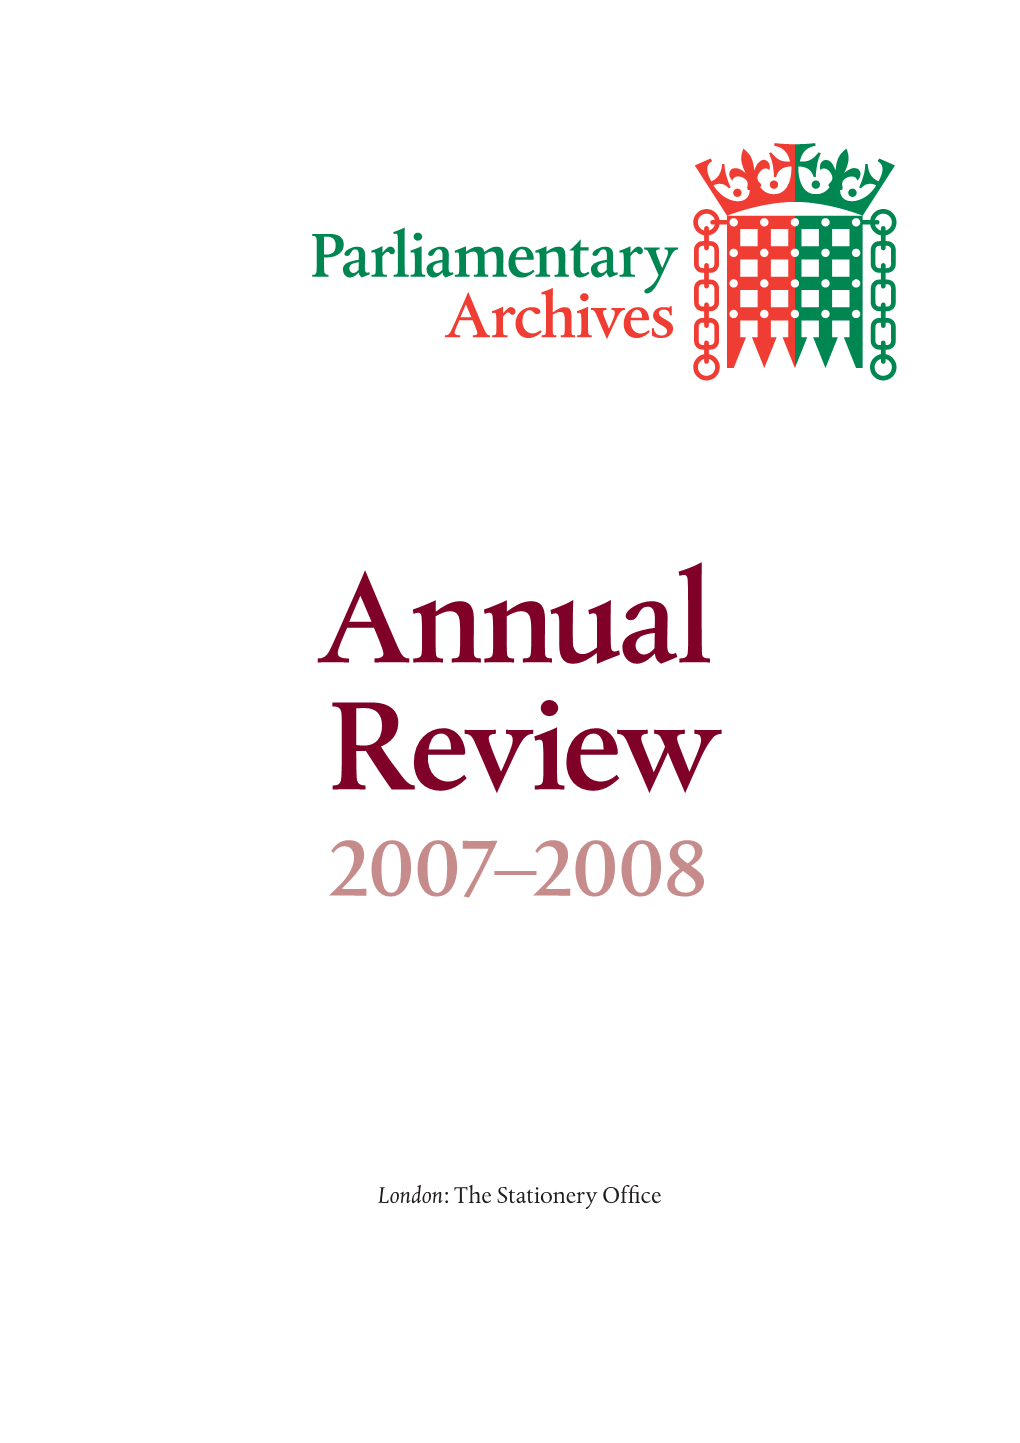 Annual Review 2007-2008